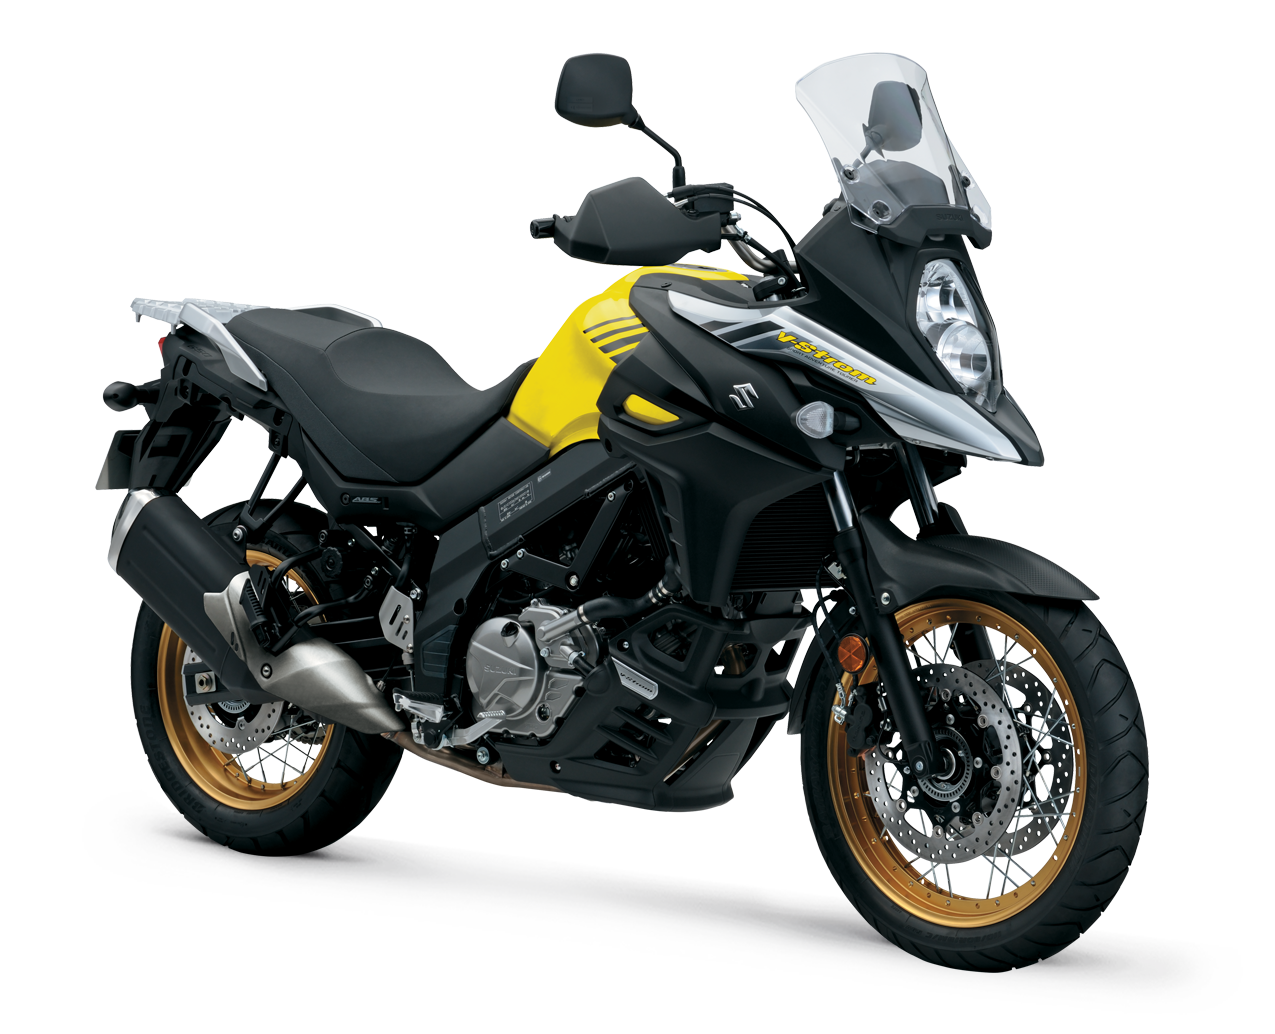 Suzuki VStrom 650 XT to be launched in India in July Report